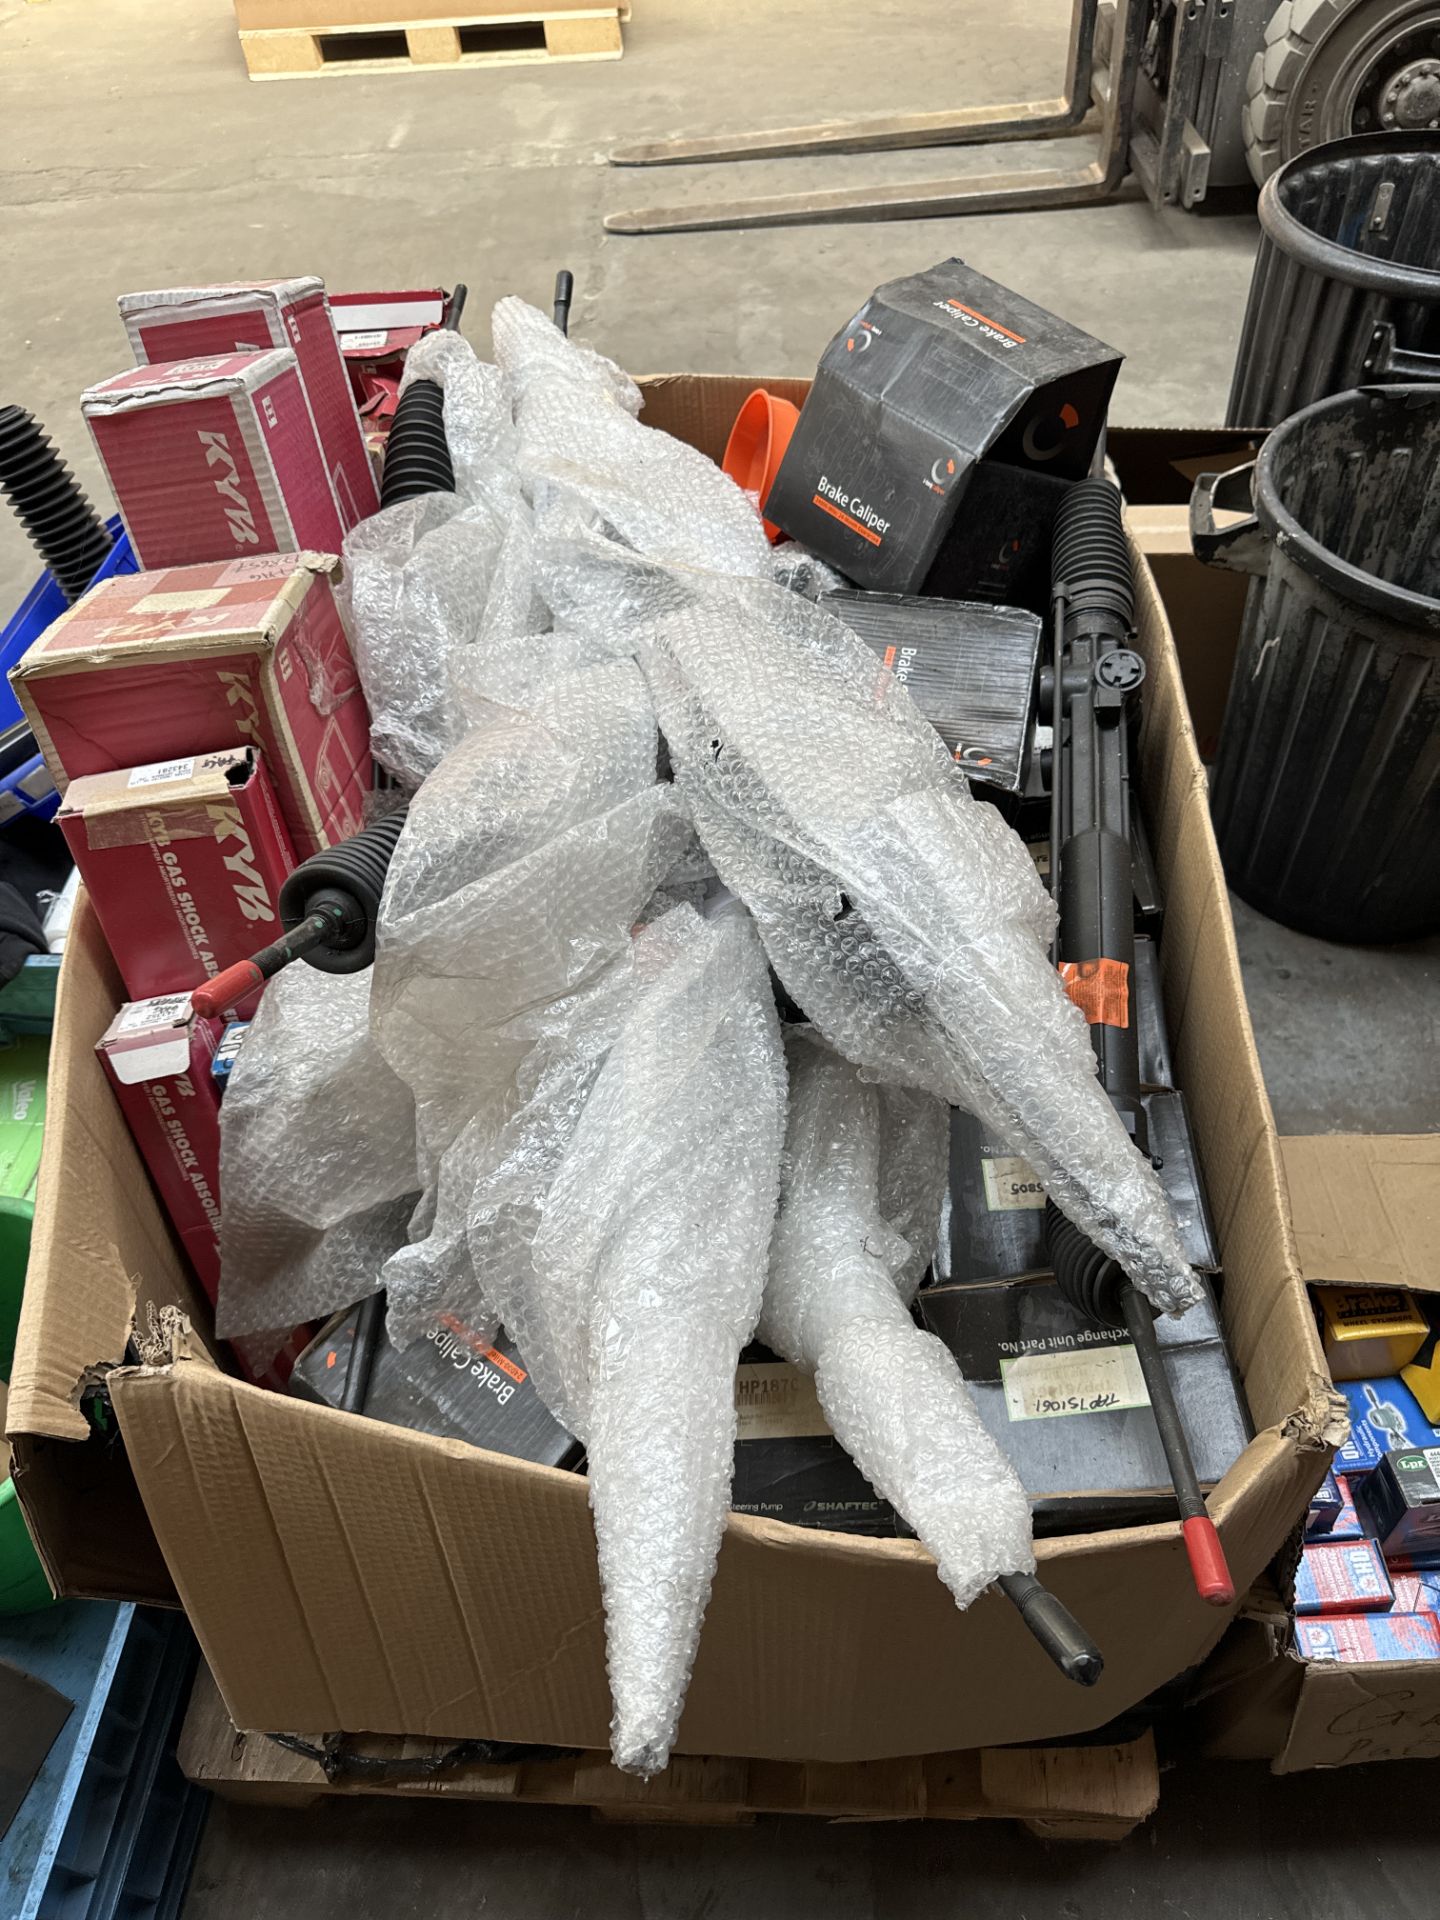 PALLET OF MIXED CAR PARTS - SHOCK ABSORBERS CALIPERS AND STEERING RACKS